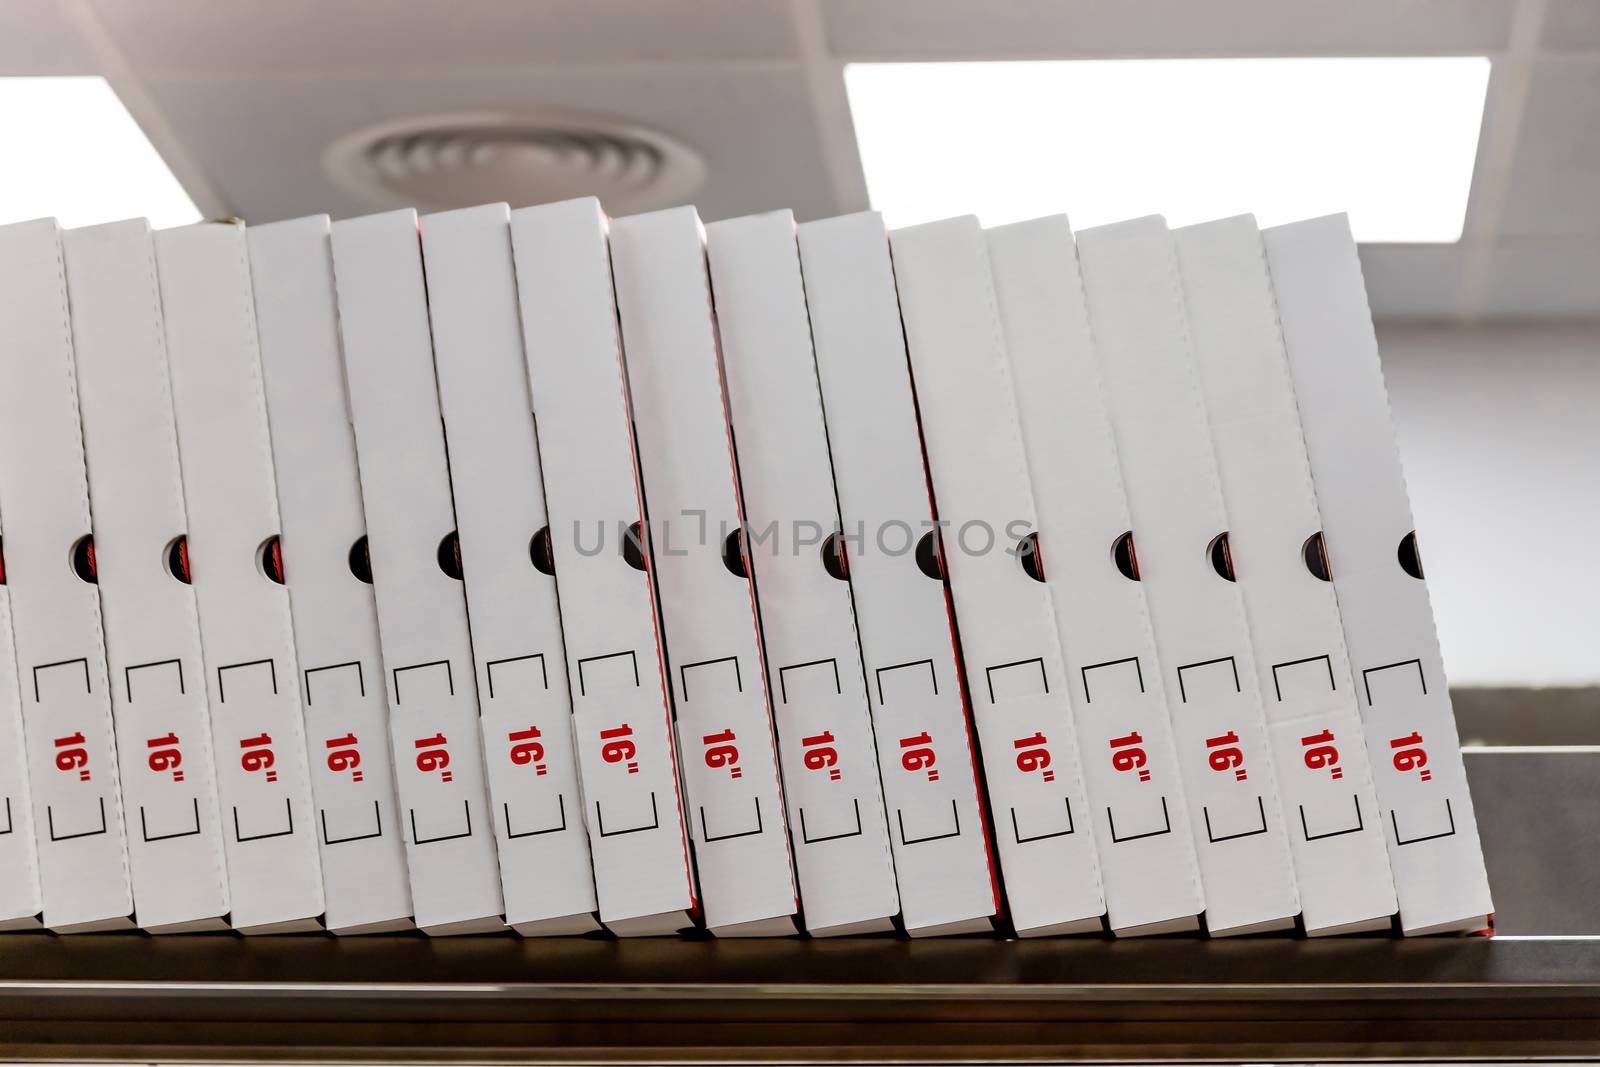 A large stack of white pizza boxes with red numbers diaimeter 16